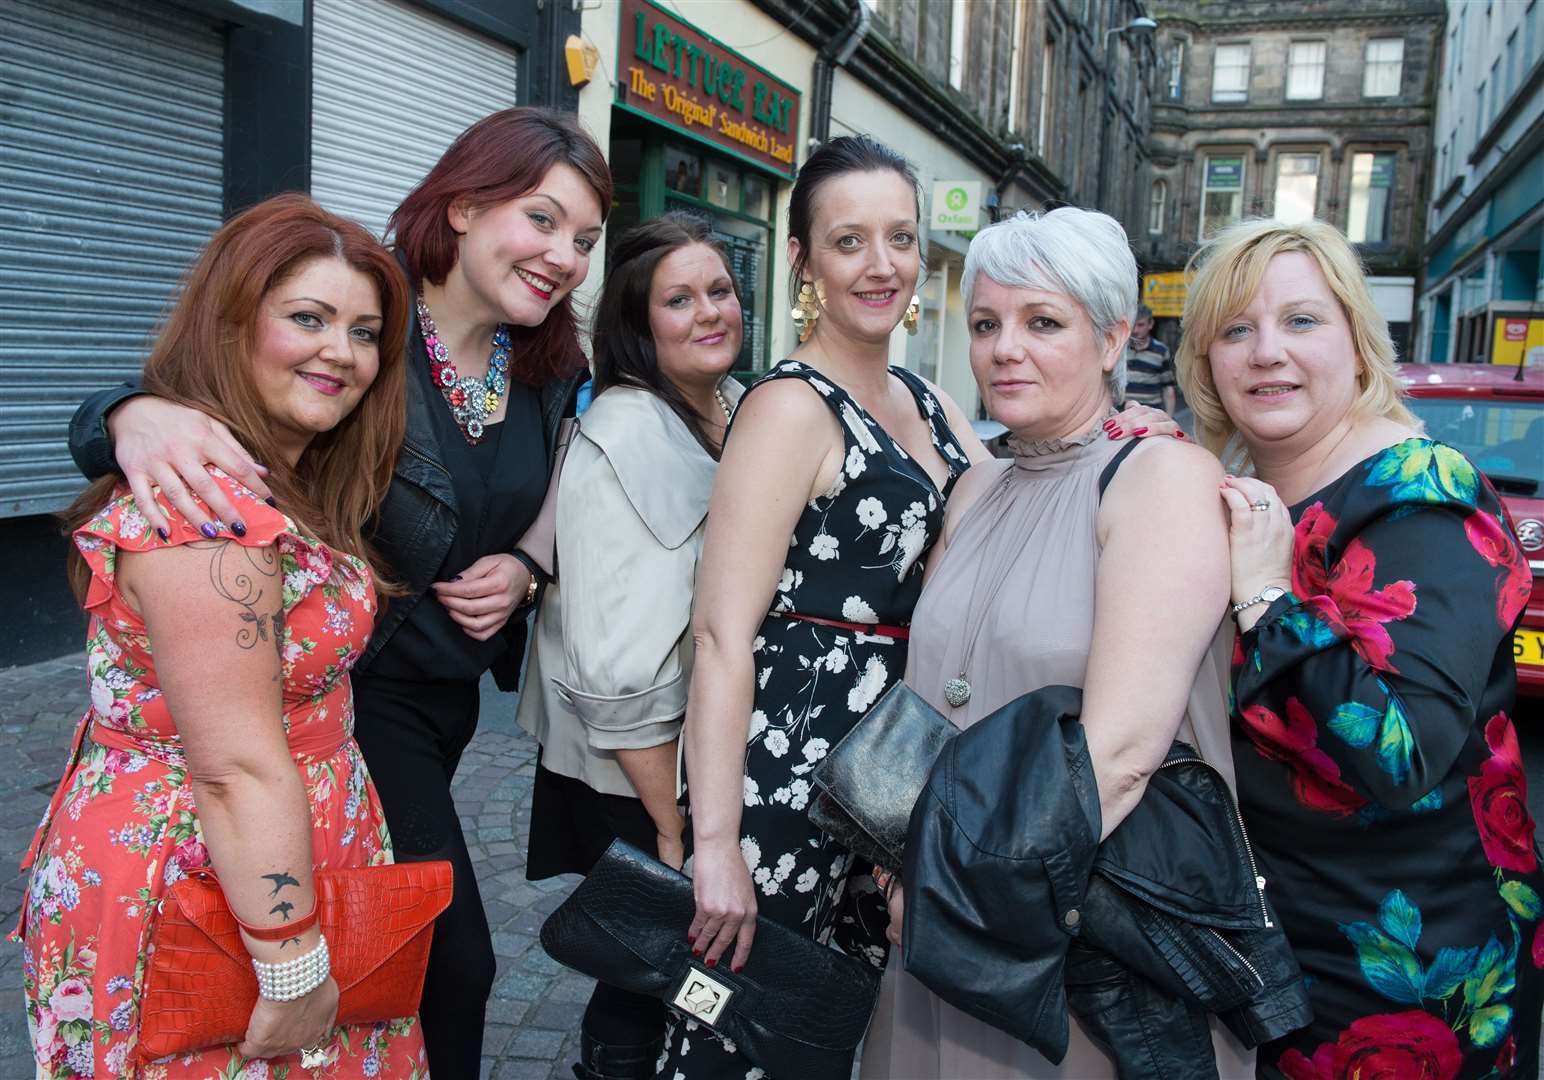 Joanne Macleod (fourth left) celebrating her birthday with the girls.